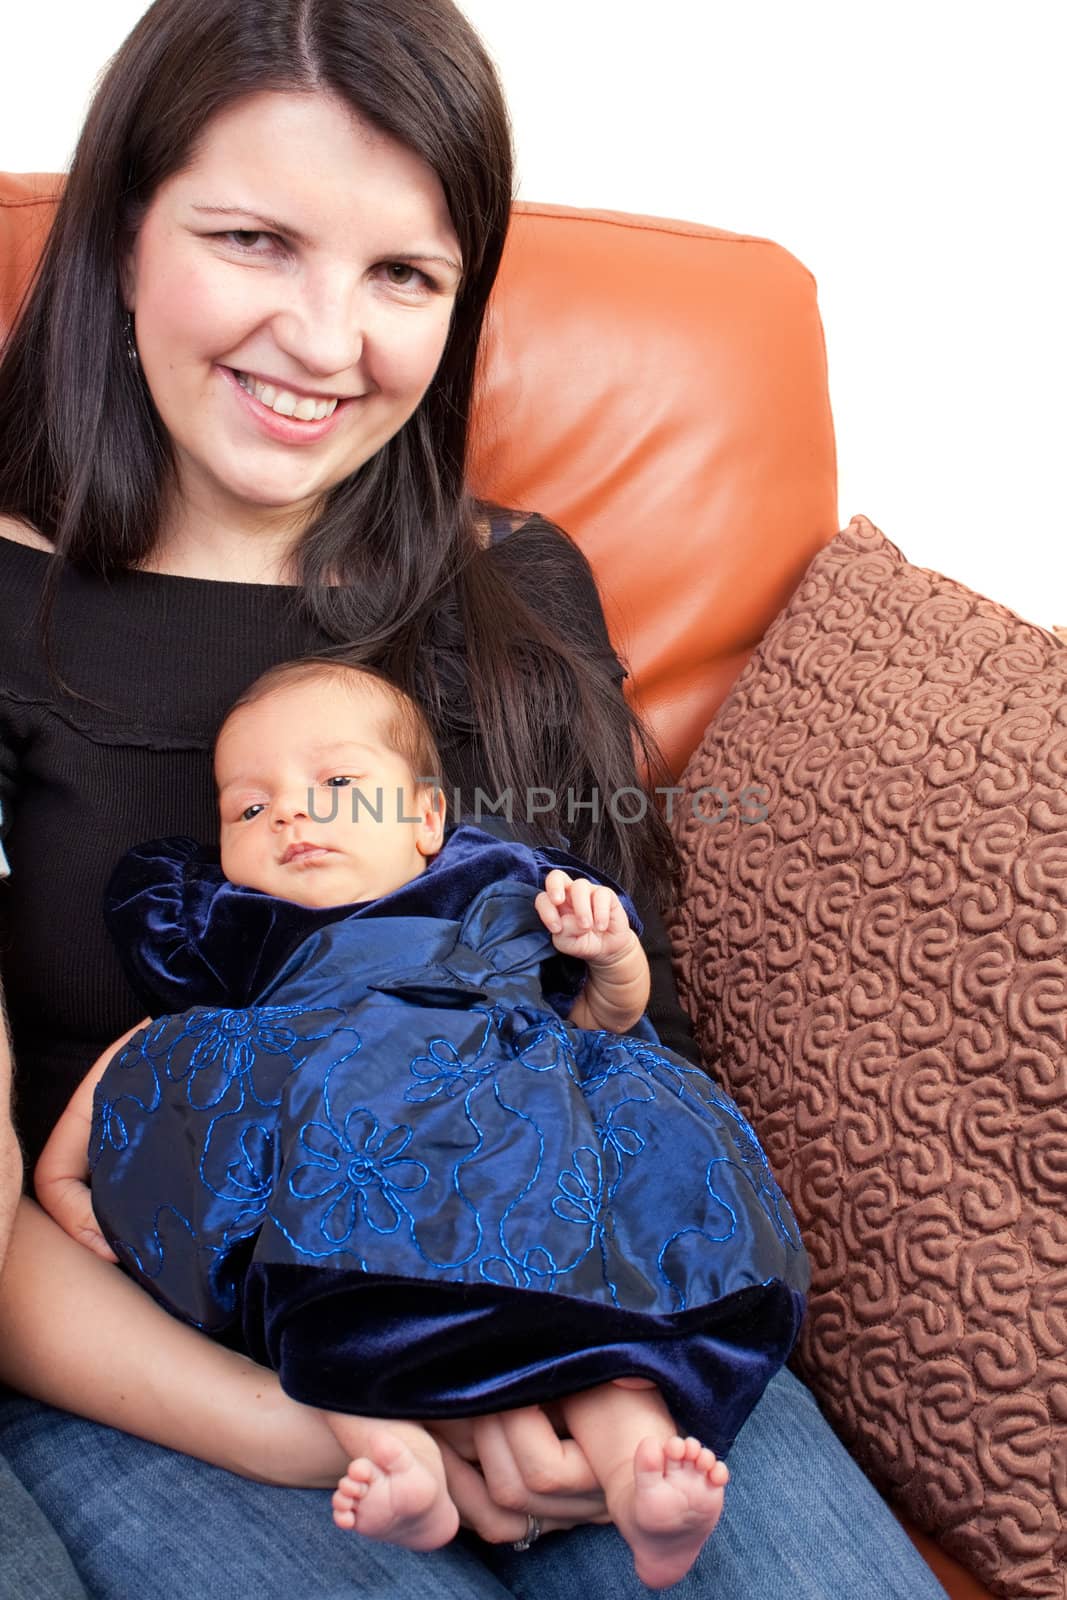 A newborn baby being held in the arms of her mother.